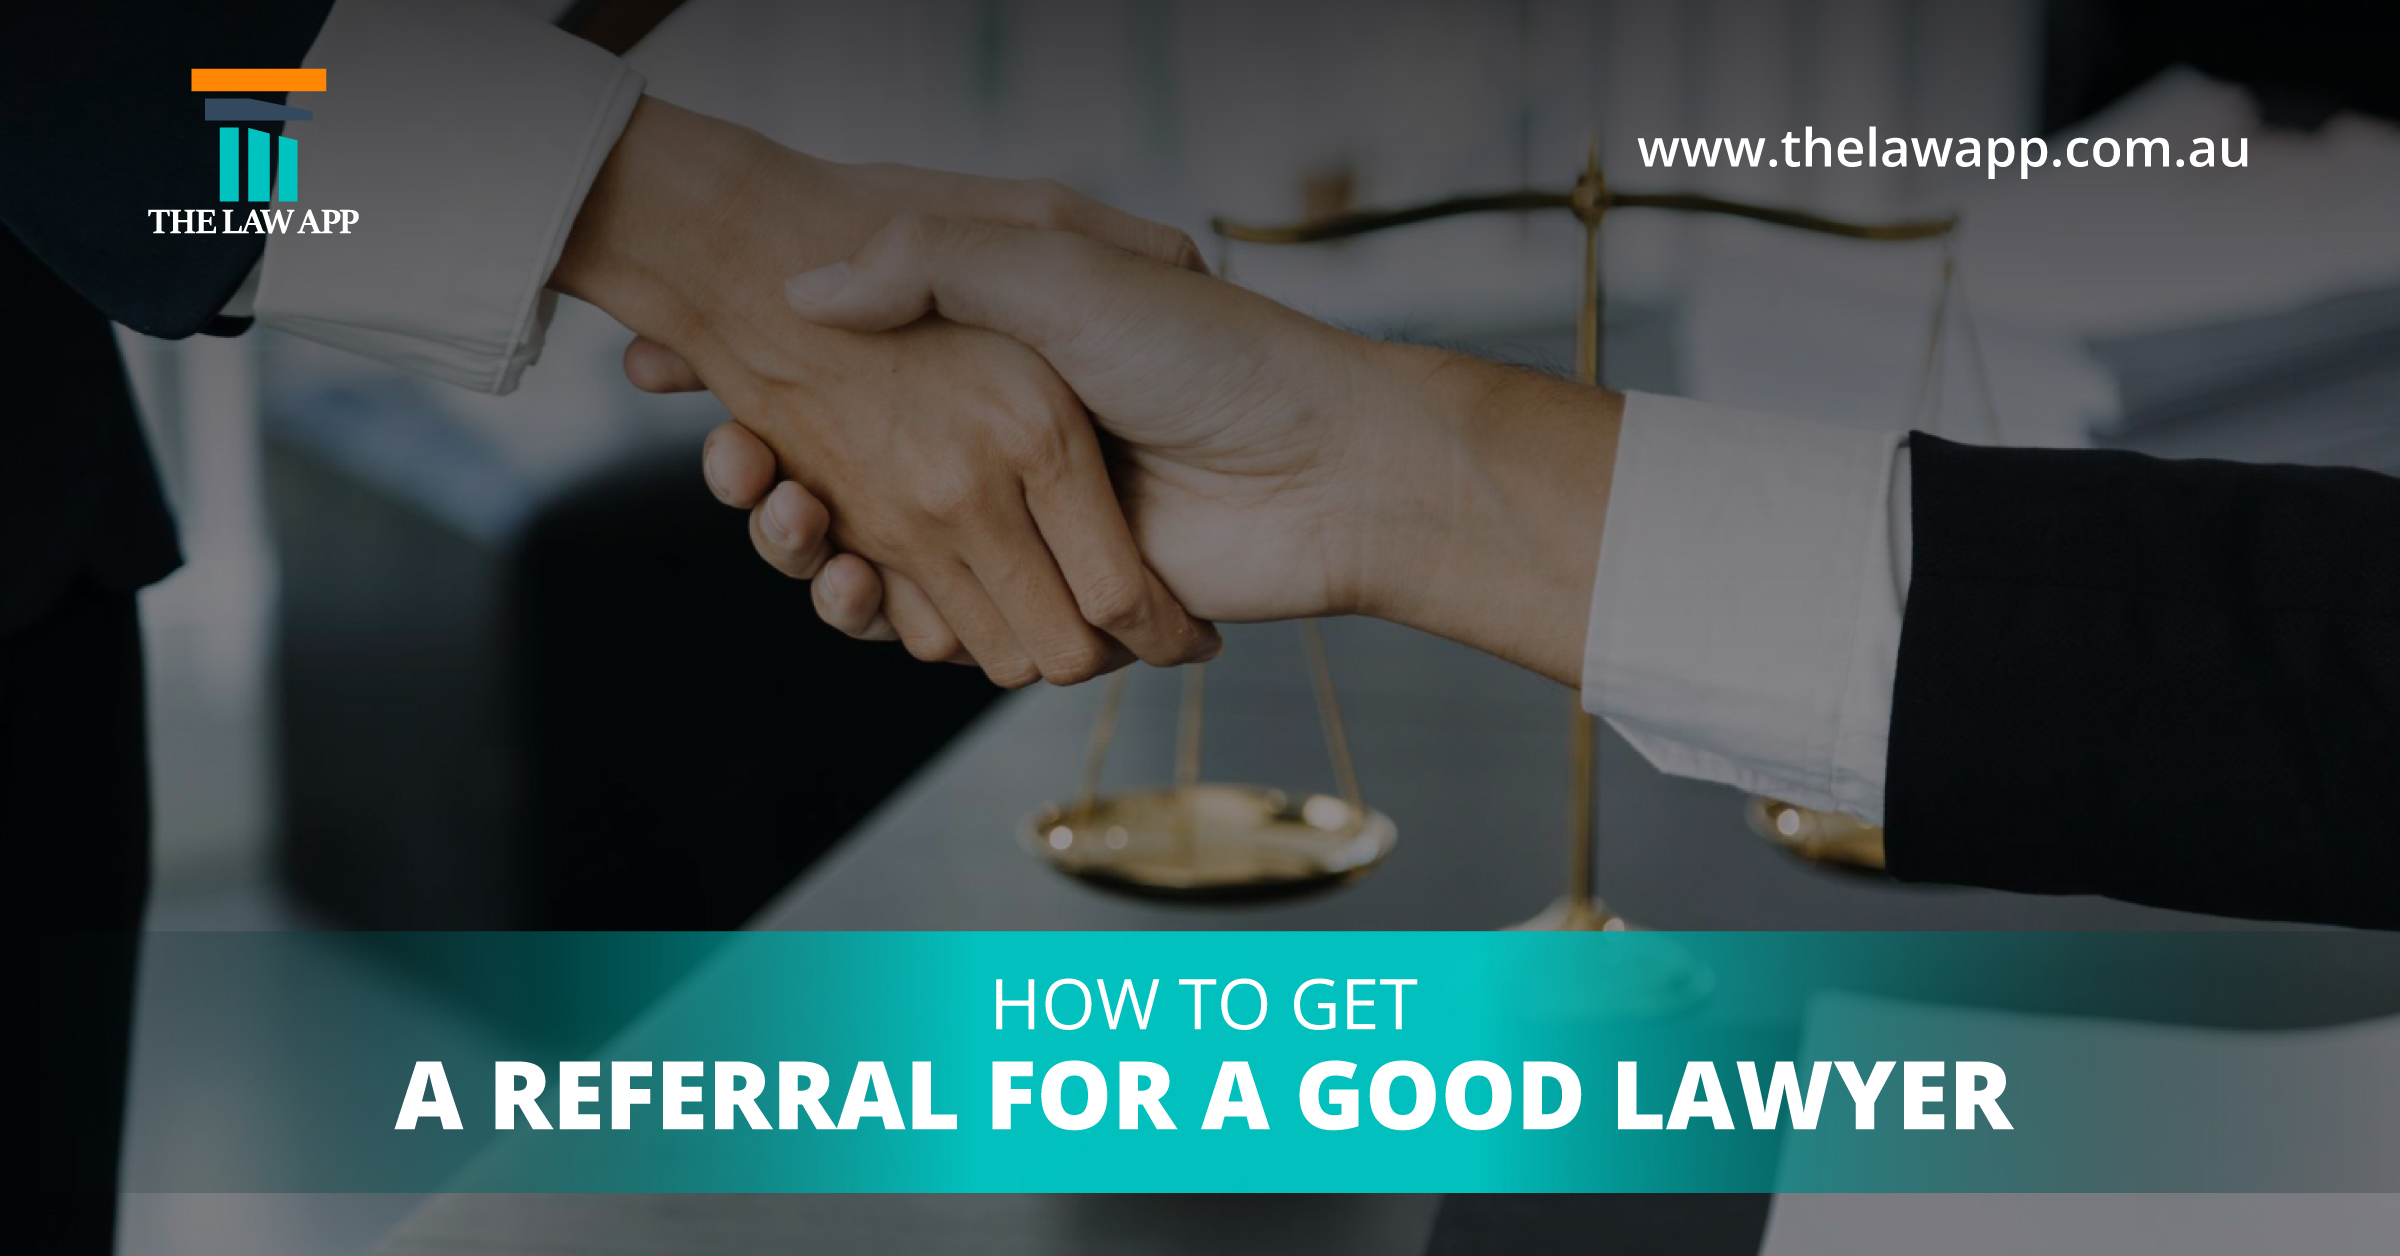 How to Get a Referral for a Good Lawyer